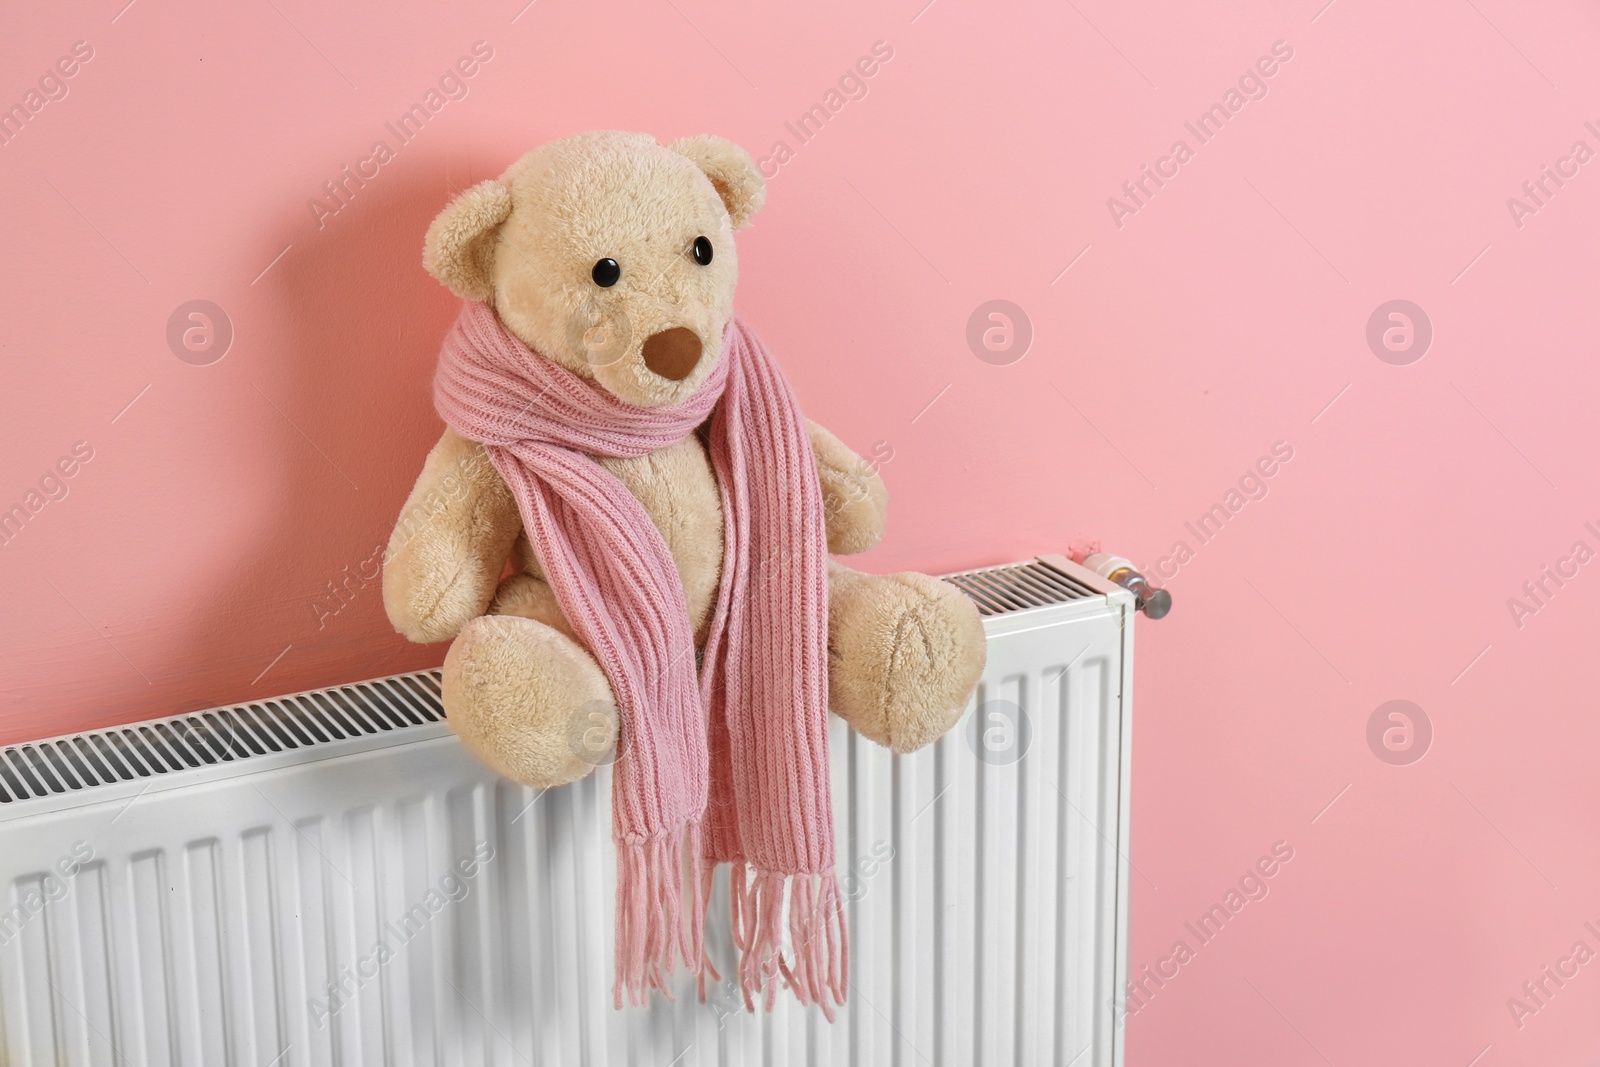 Photo of Teddy bear with knitted scarf on heating radiator near color wall